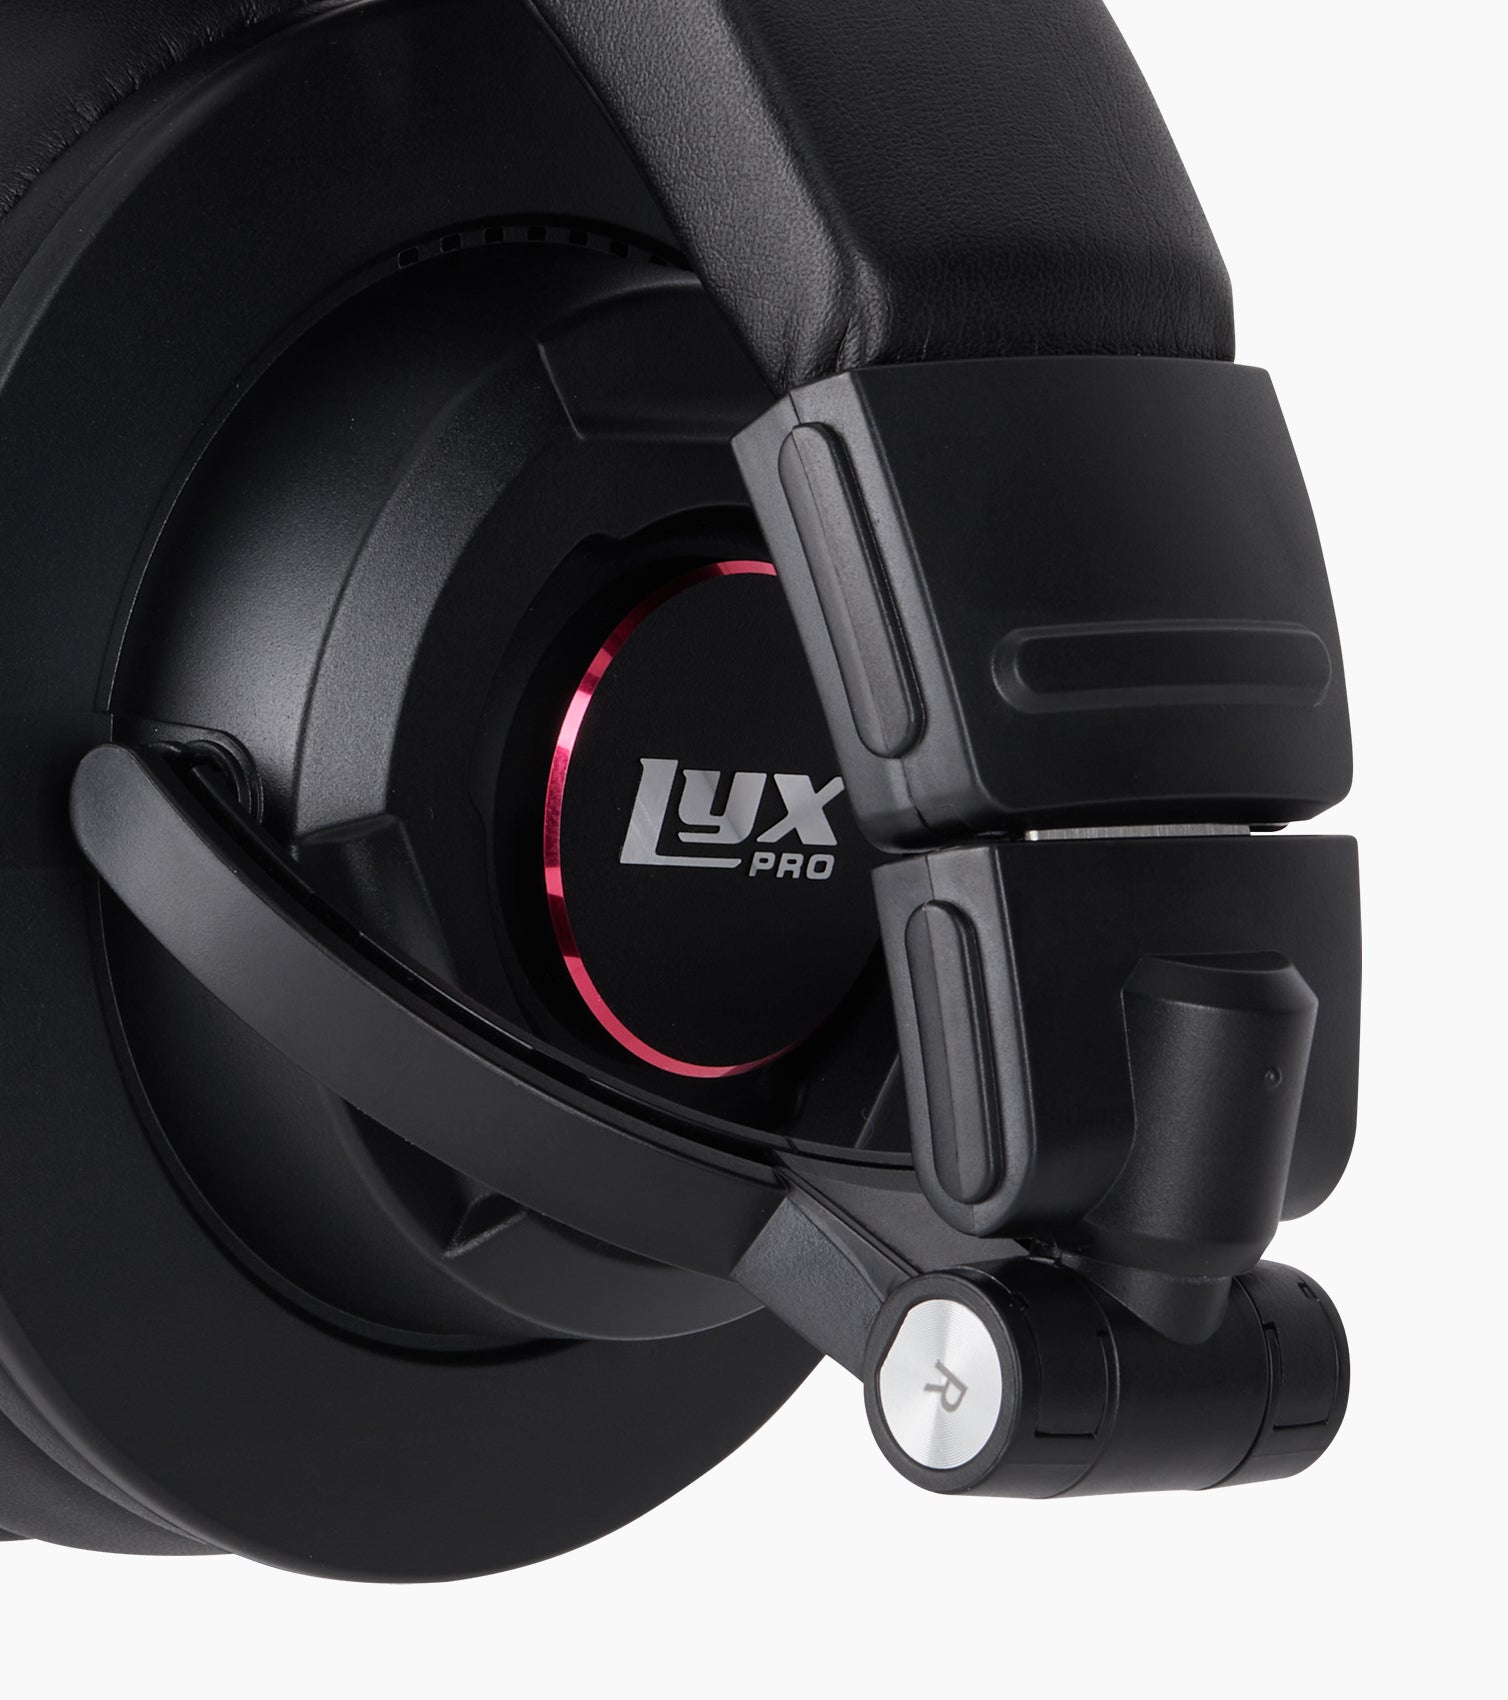 LyxPro Over-Ear Professional Studio Headphones with Sound Isolation - Right view